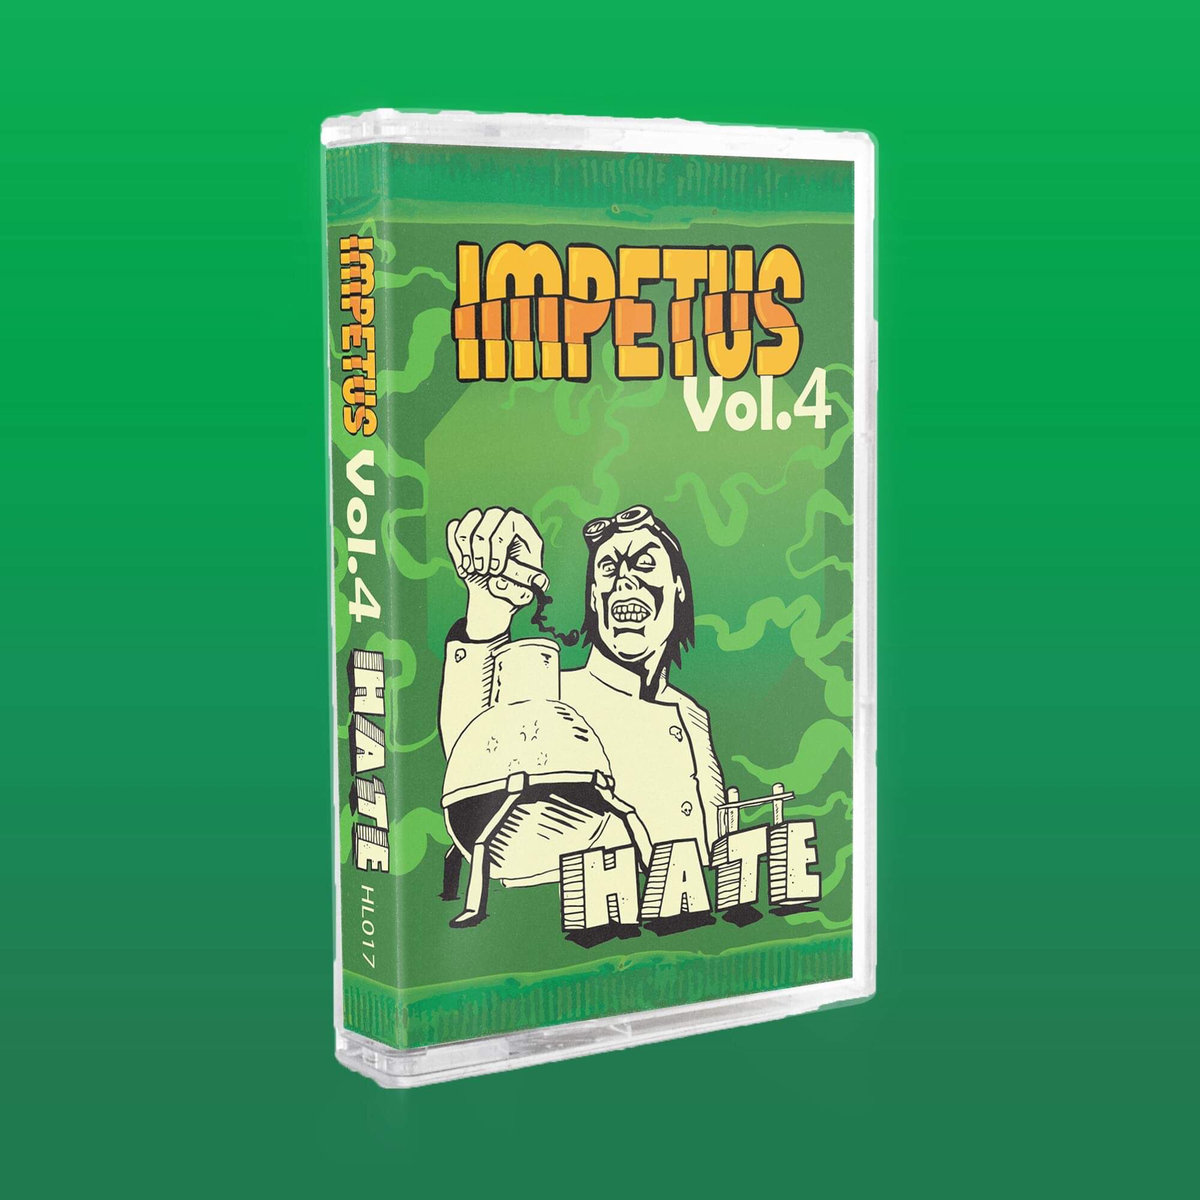 Digginsack Beat Battle Compilation Vol. 4 & Heisse Luft "Impetus Vol. 4 "Hate" Beat Compilation now available as Cassette and Digital Release